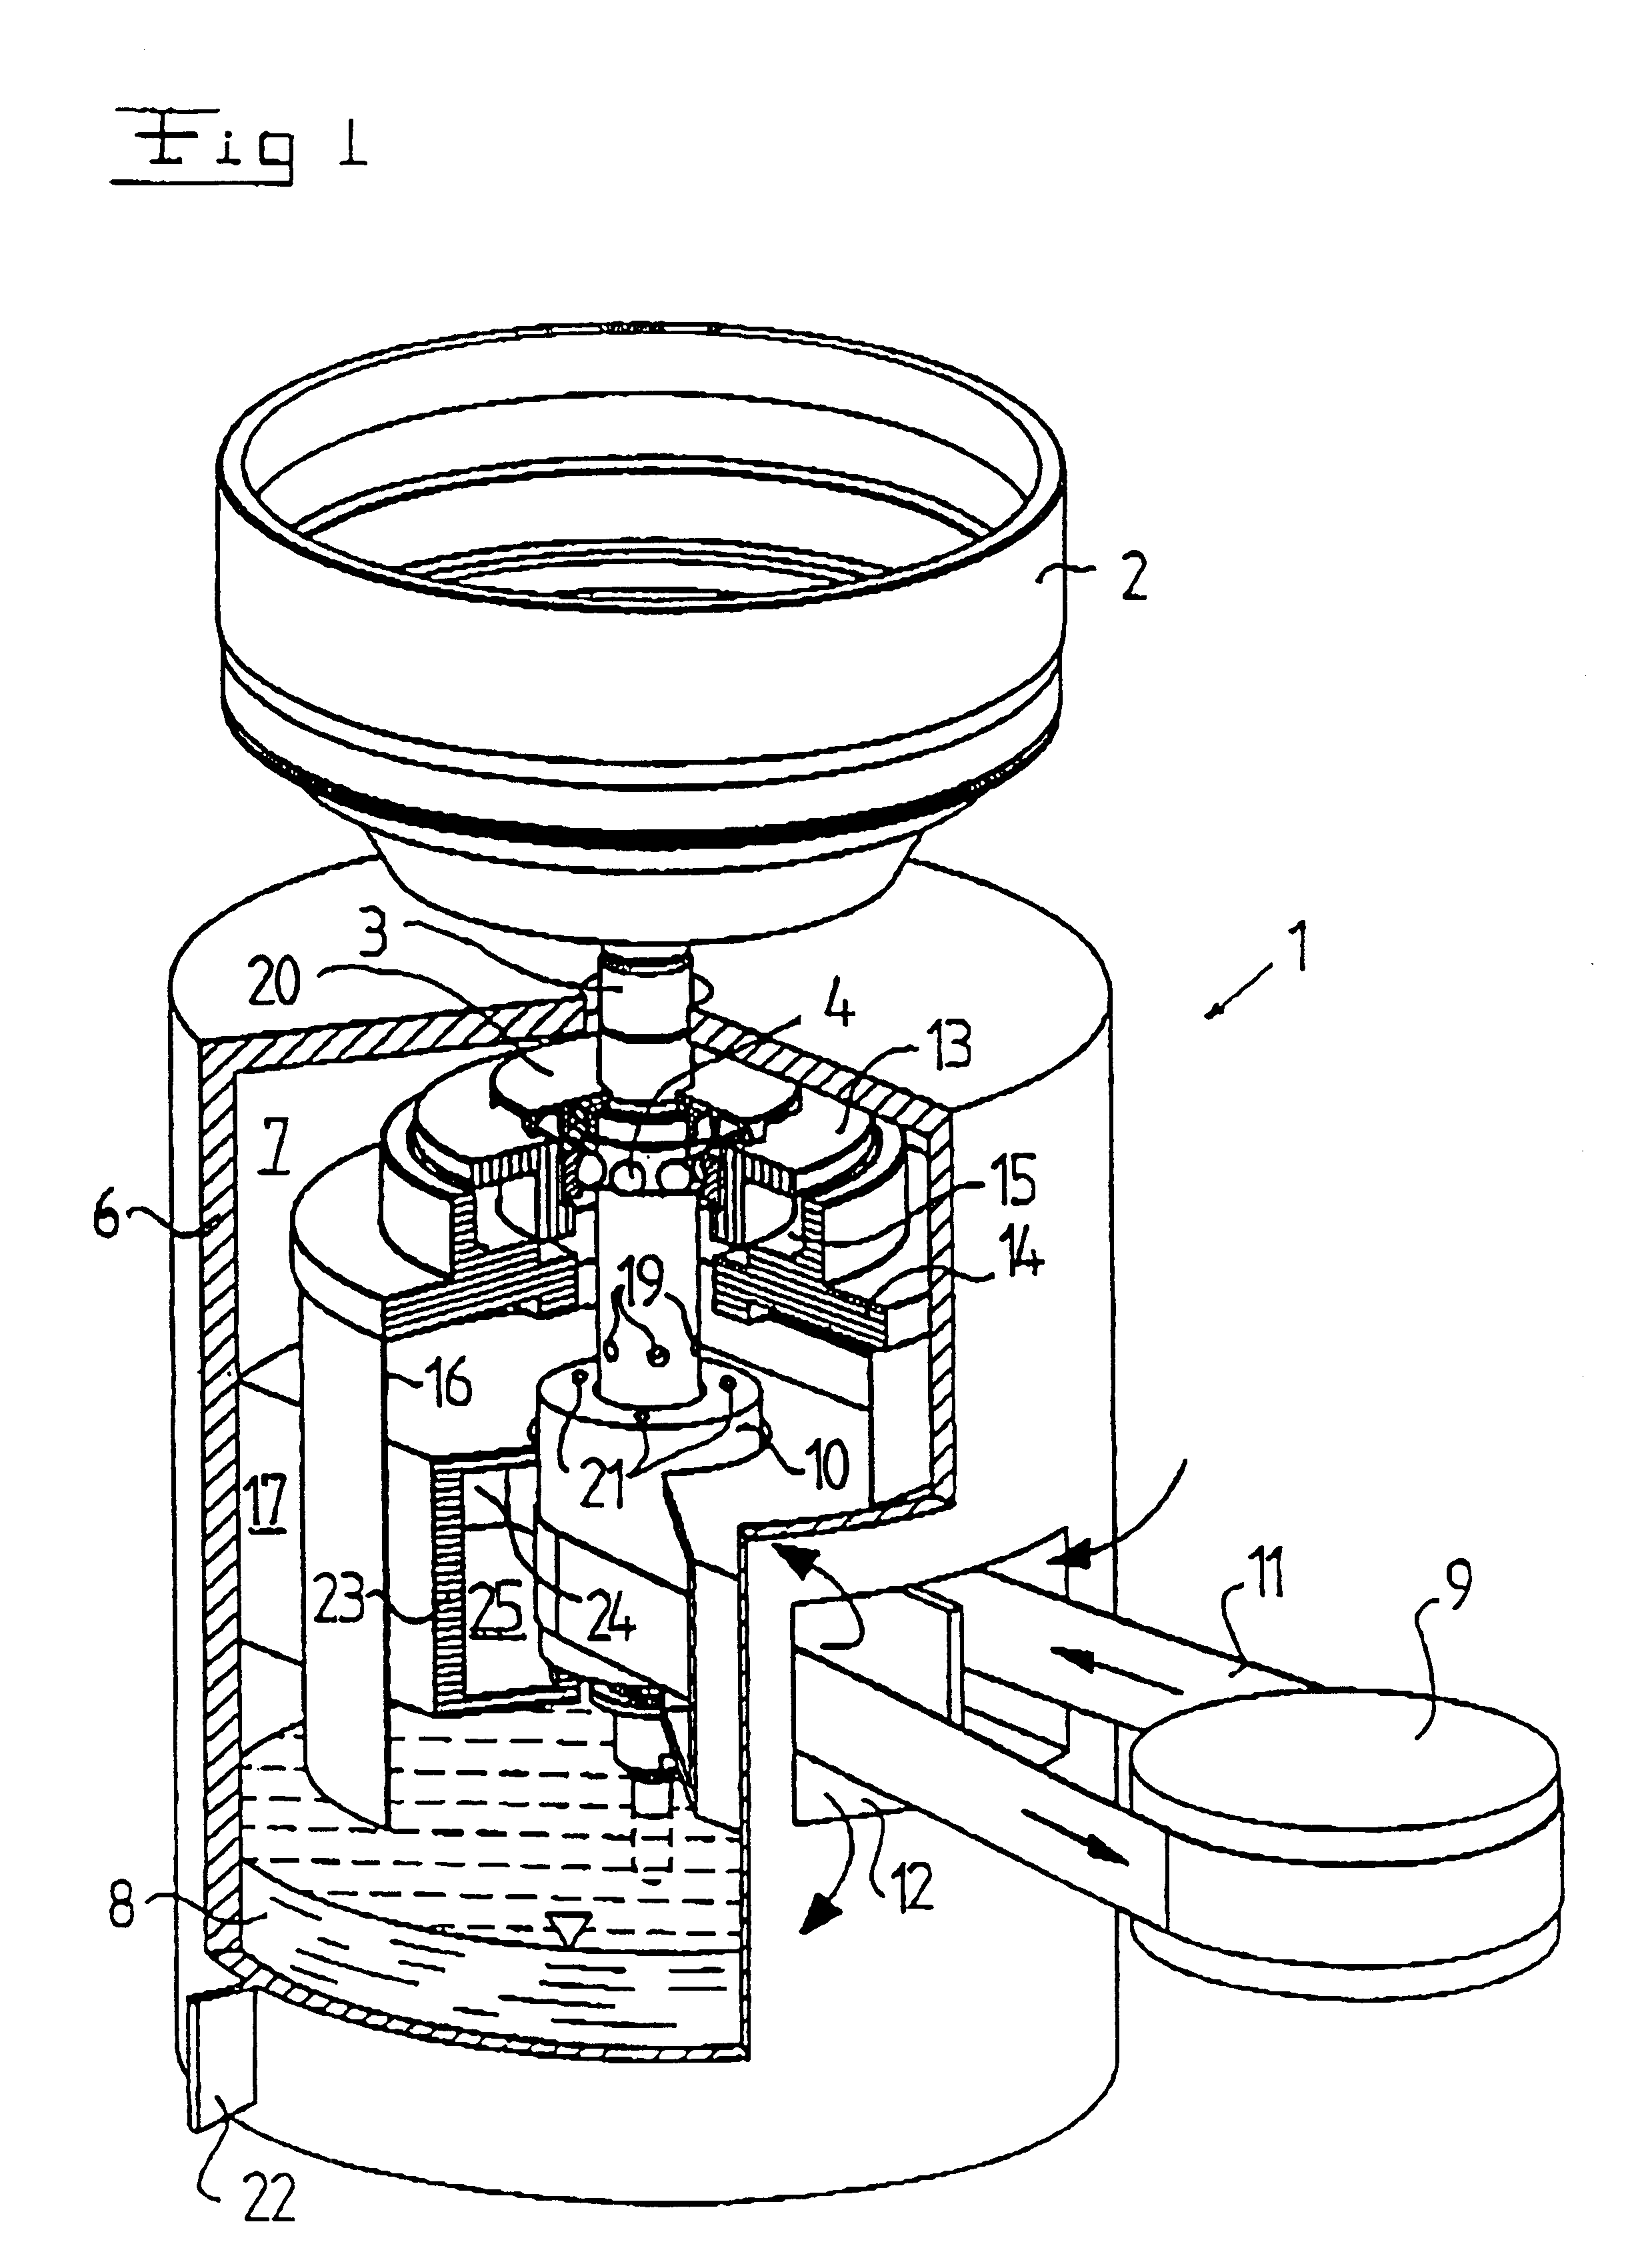 Drive unit for centrifuge rotor of a centrifugal separator